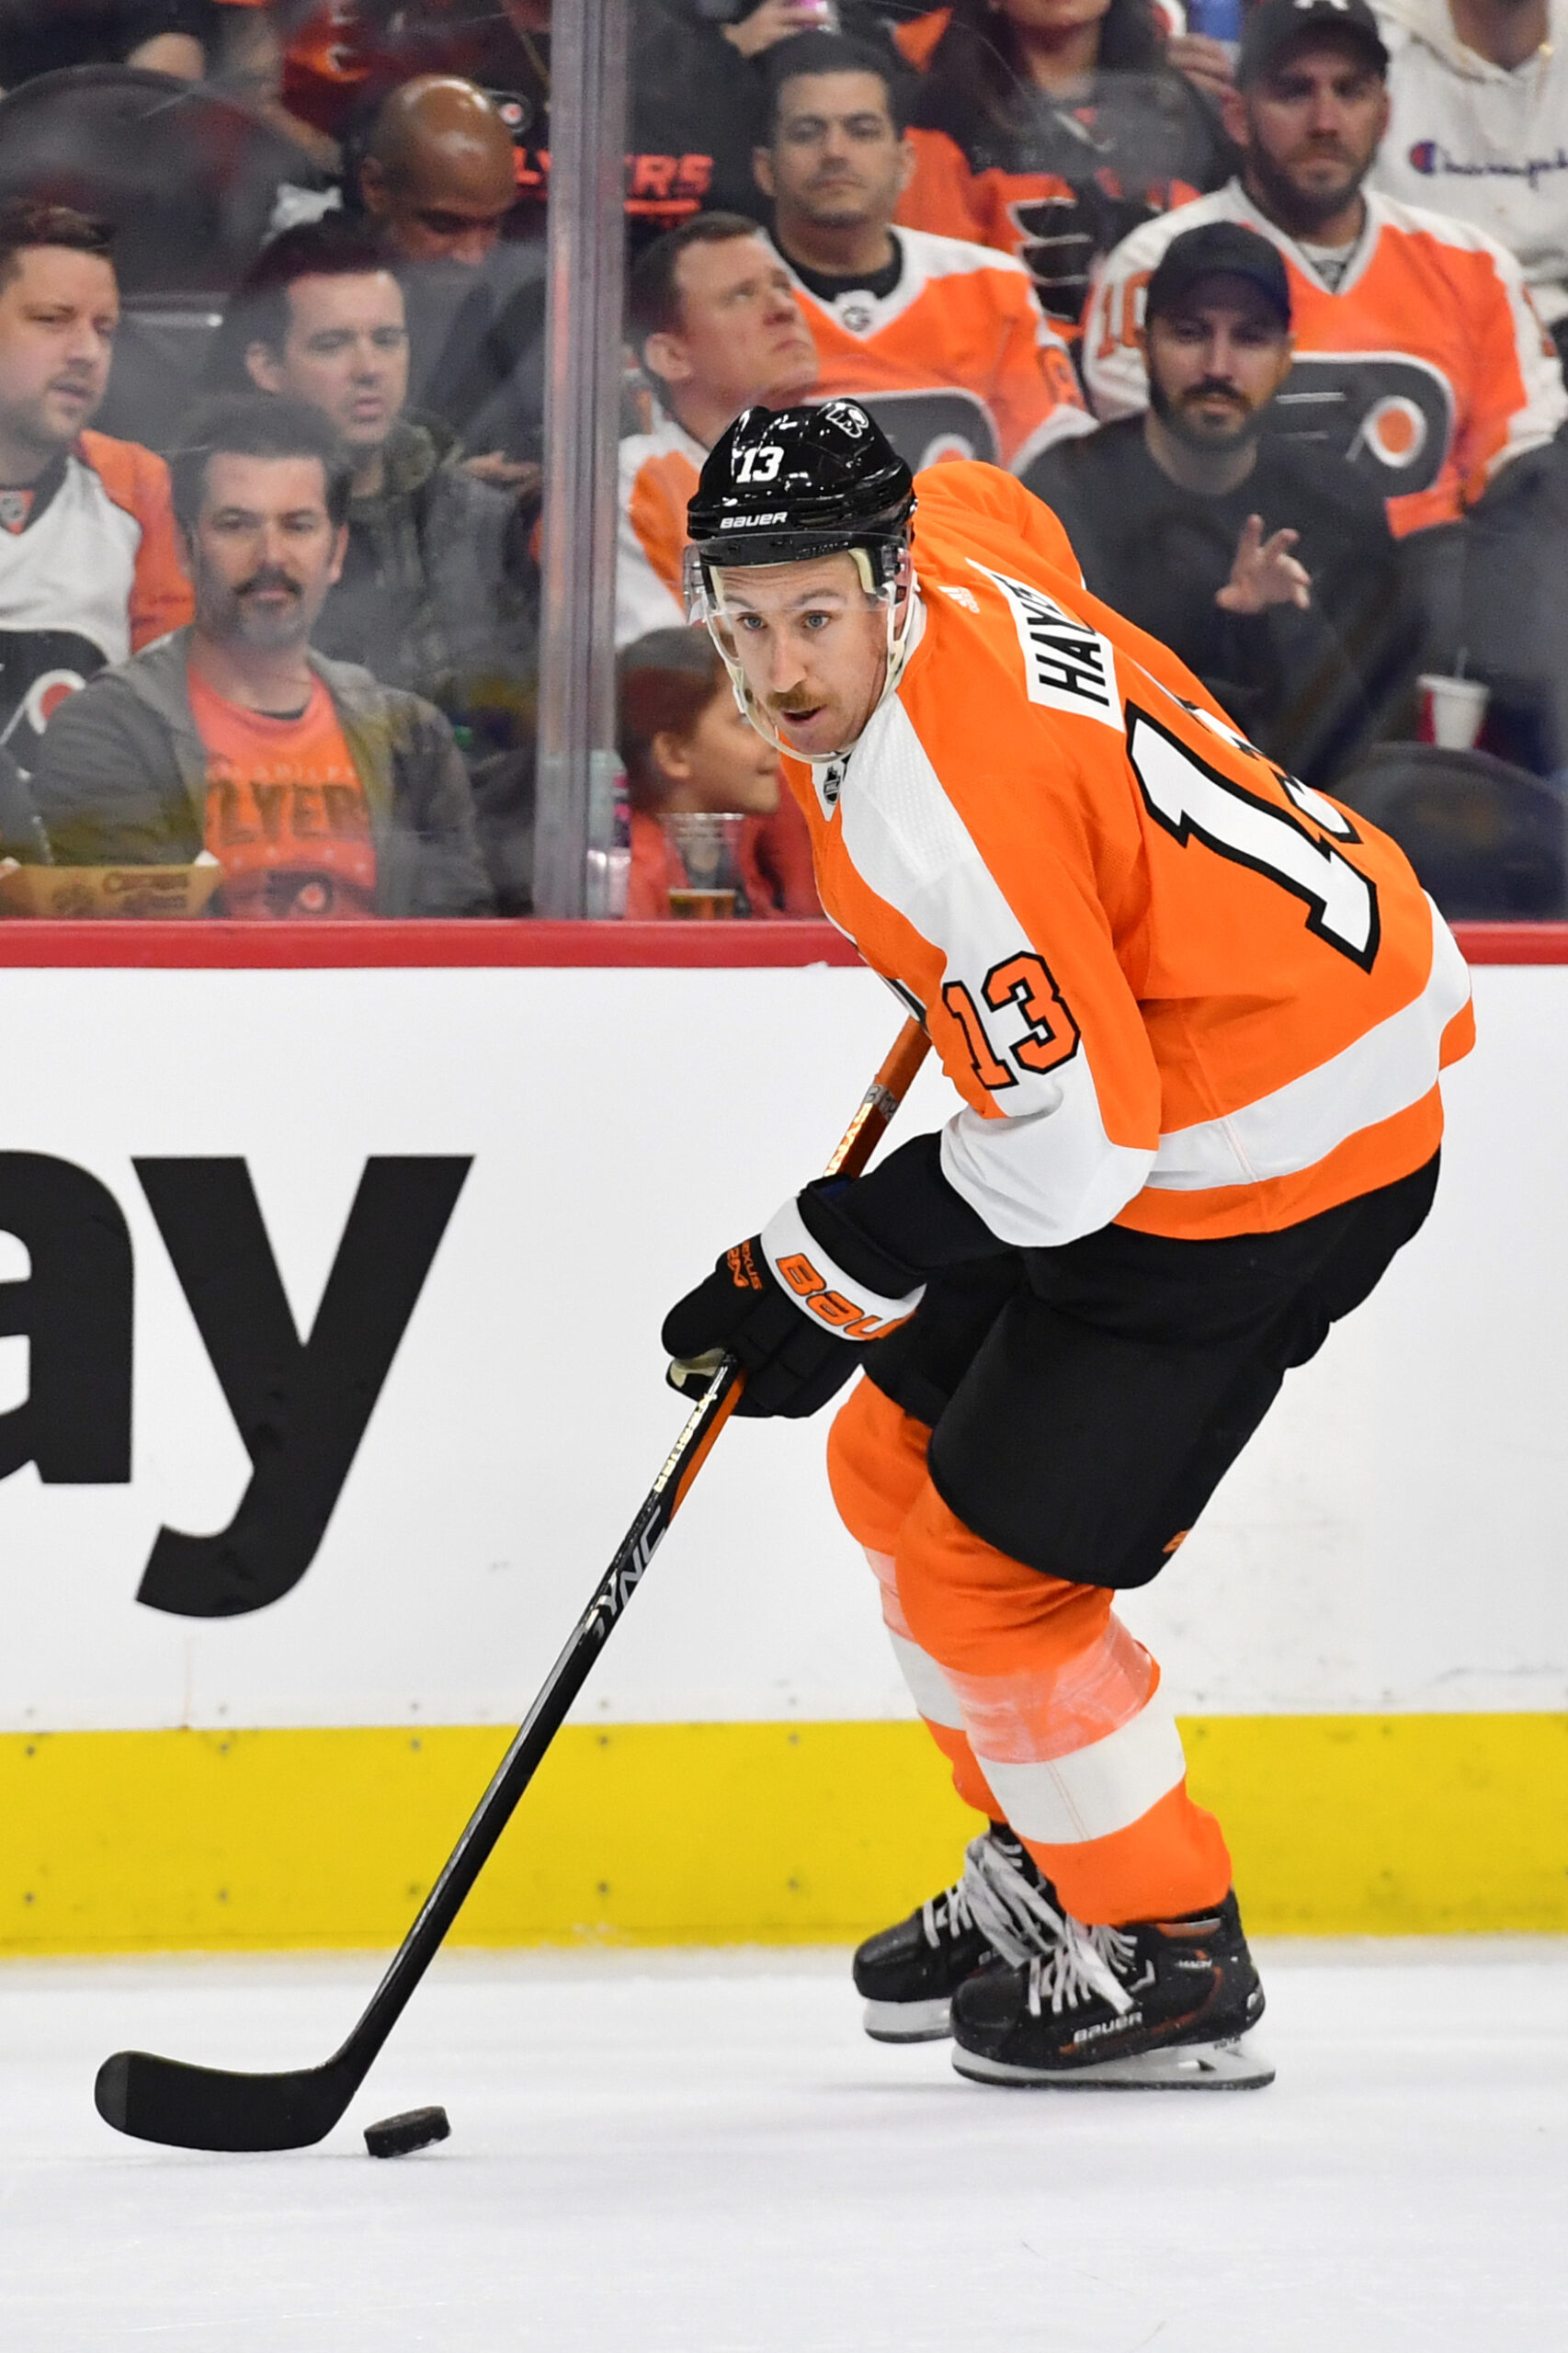 Flyers News & Rumors: Frost, Tortorella, Addition by Subtraction